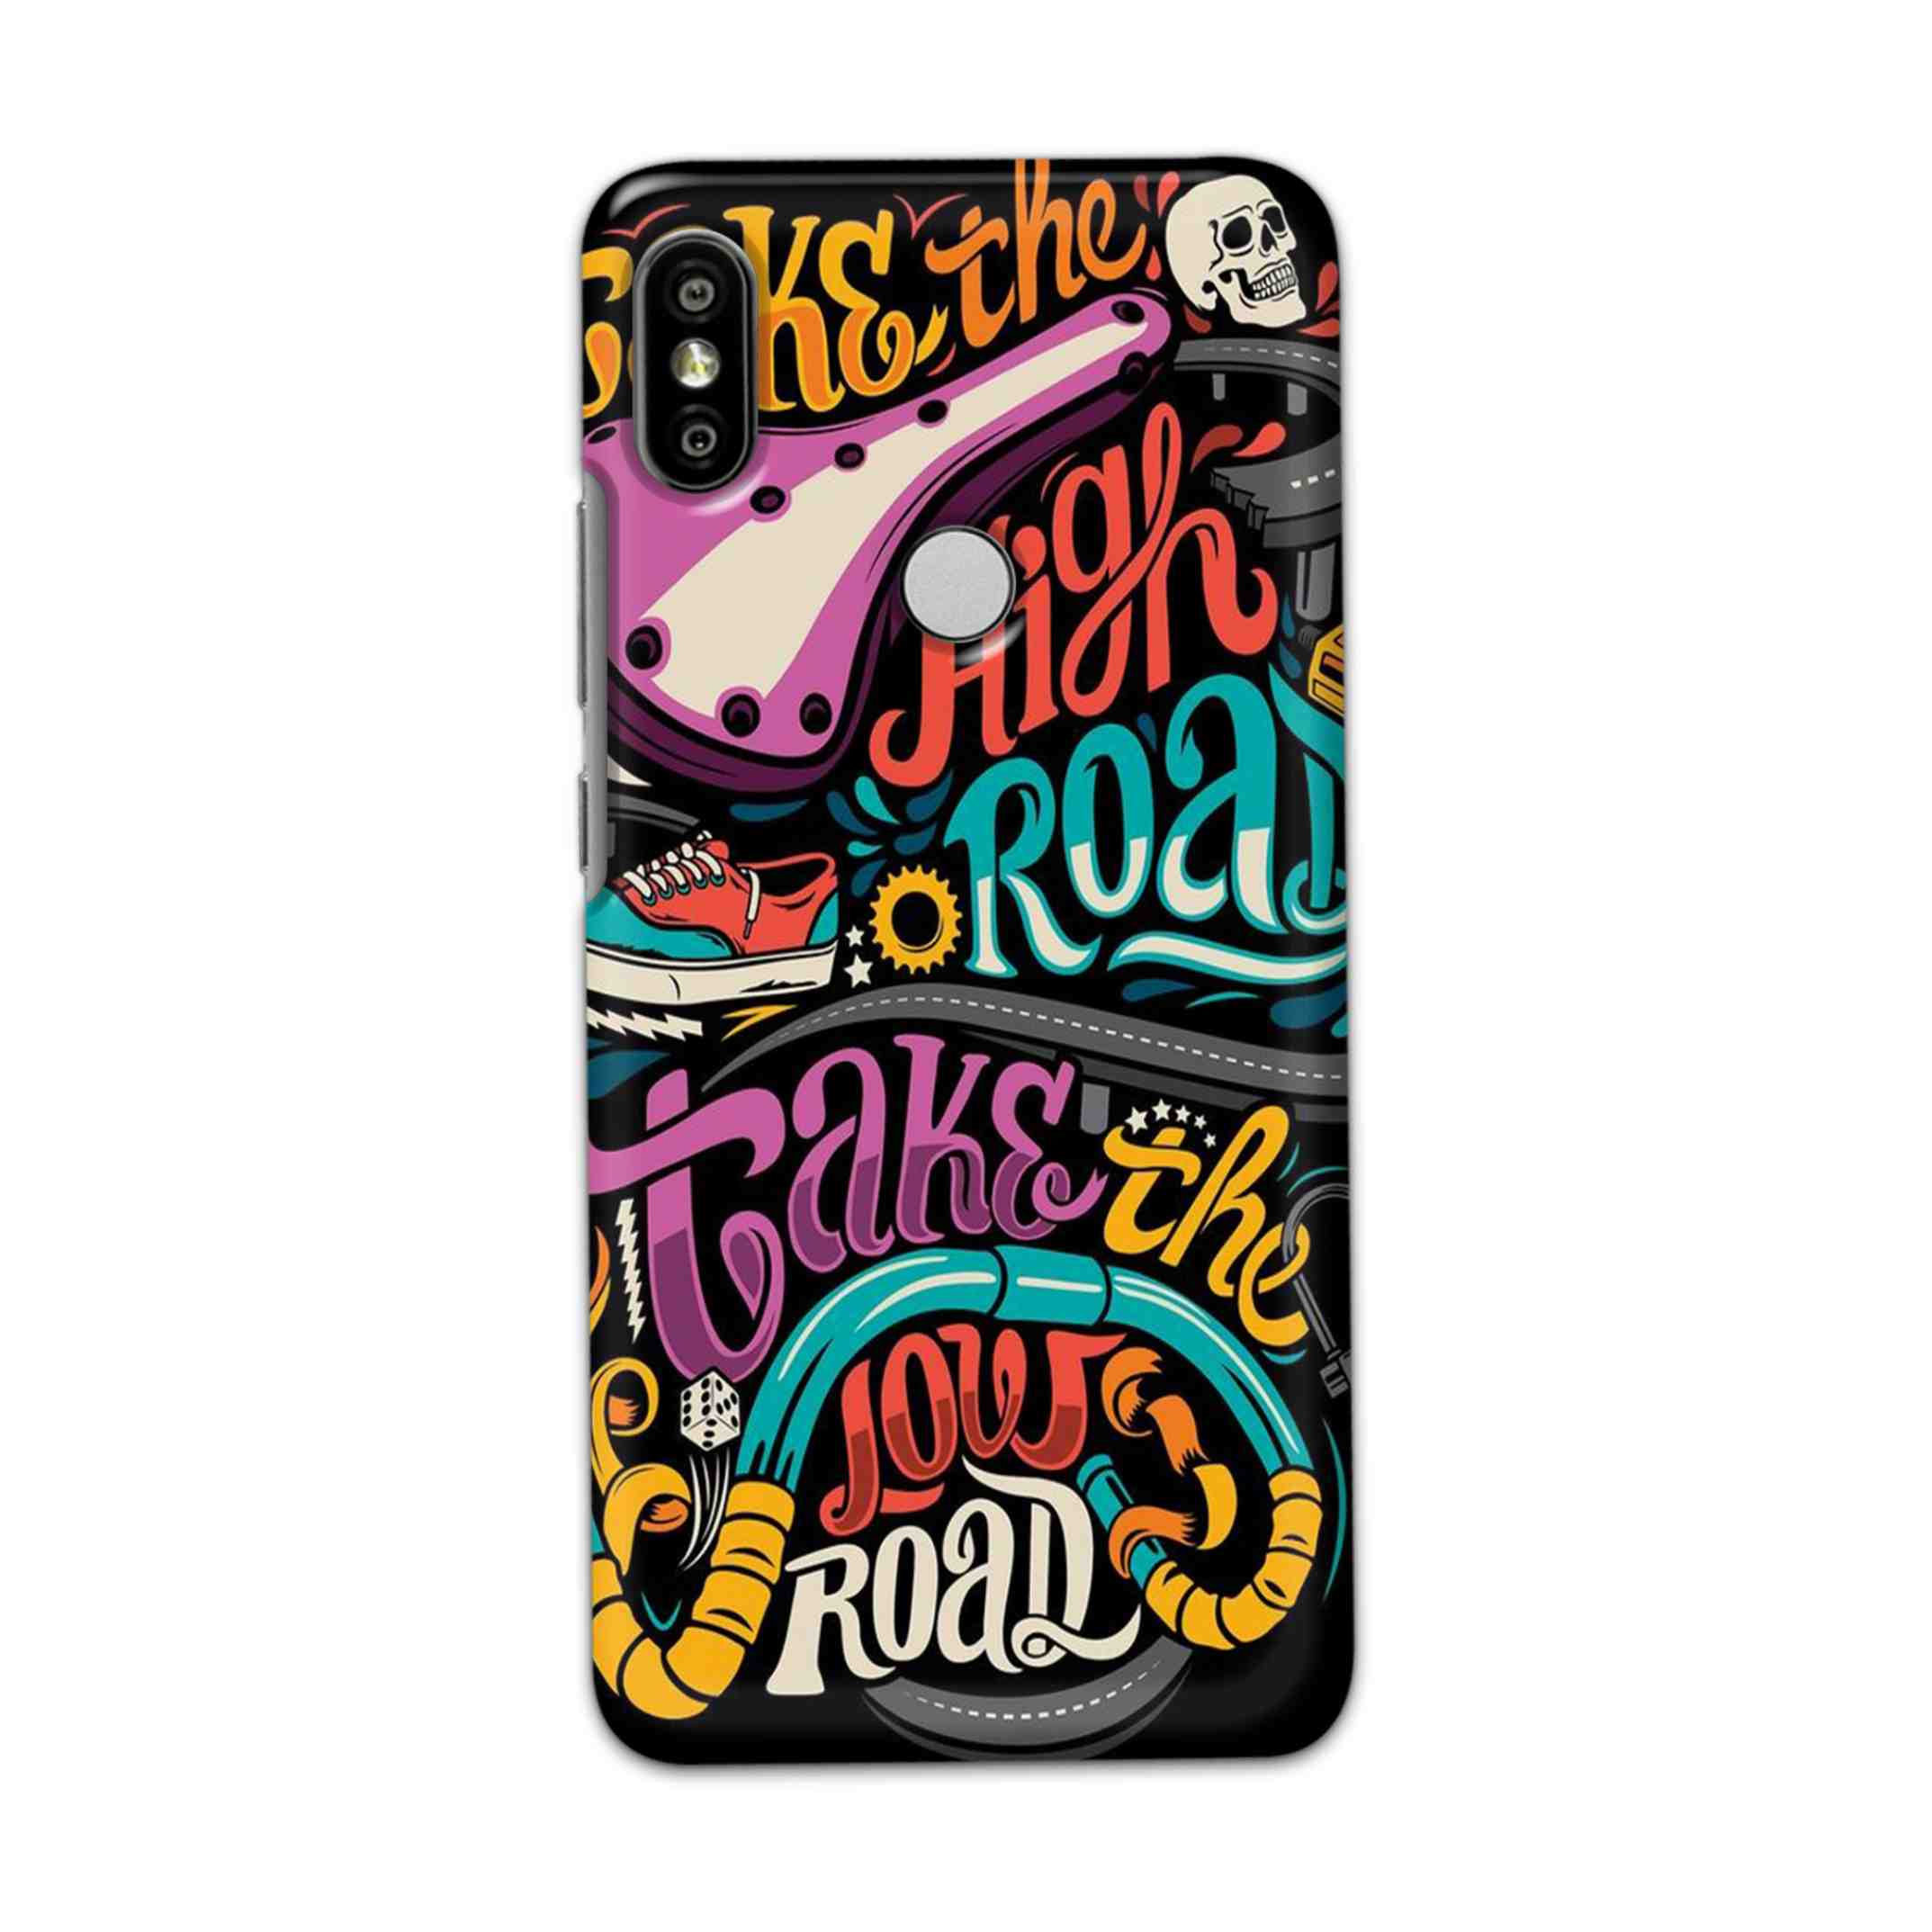 Buy Take The High Road Hard Back Mobile Phone Case Cover For Redmi S2 / Y2 Online